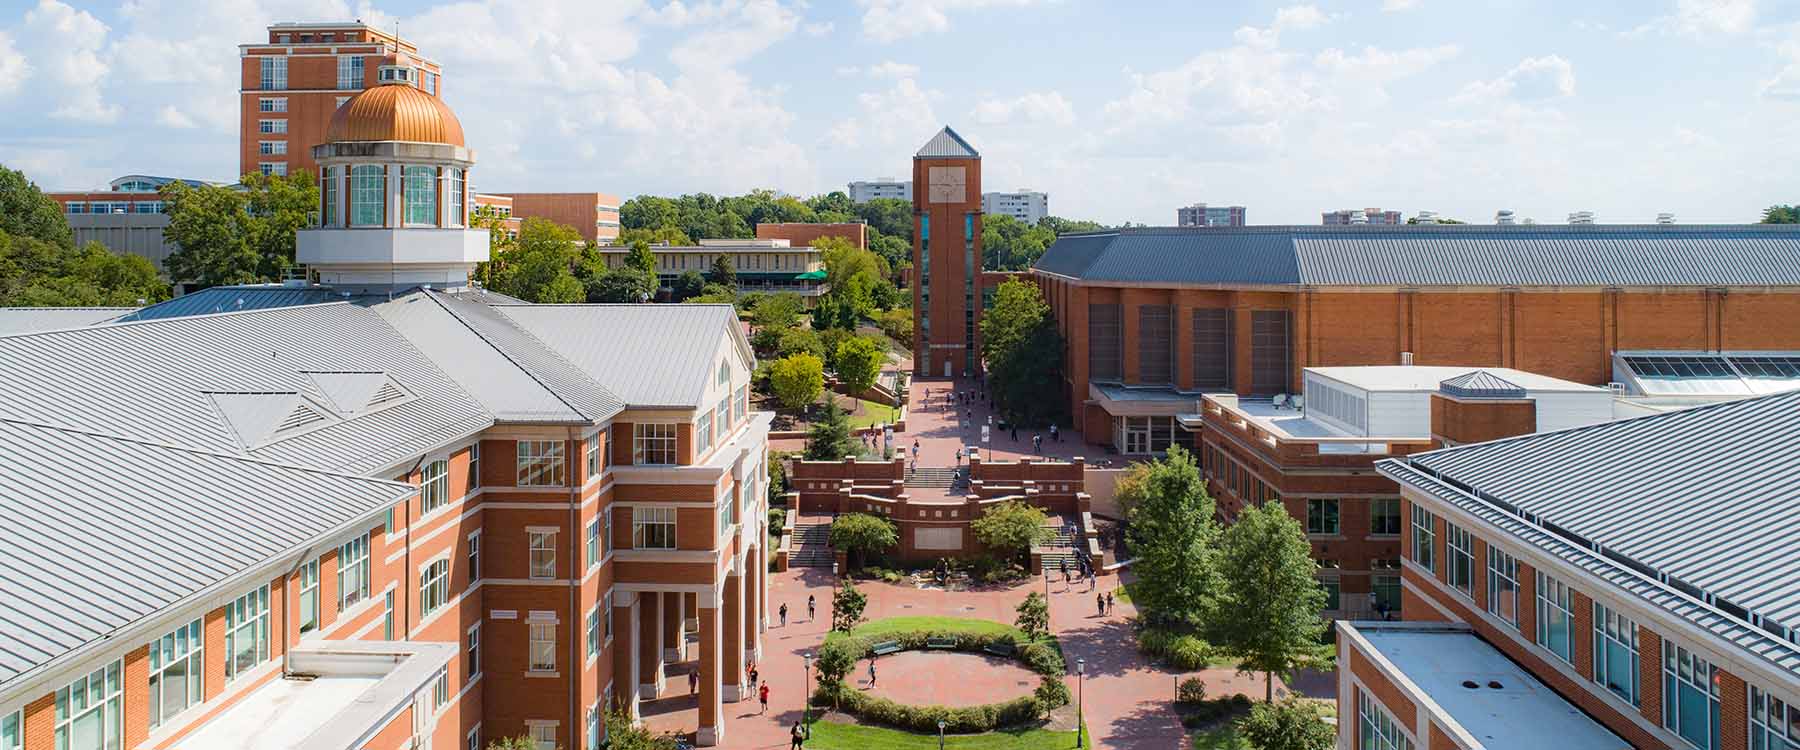 UNC Charlotte ranked among top employers in North Carolina by Forbes magazine